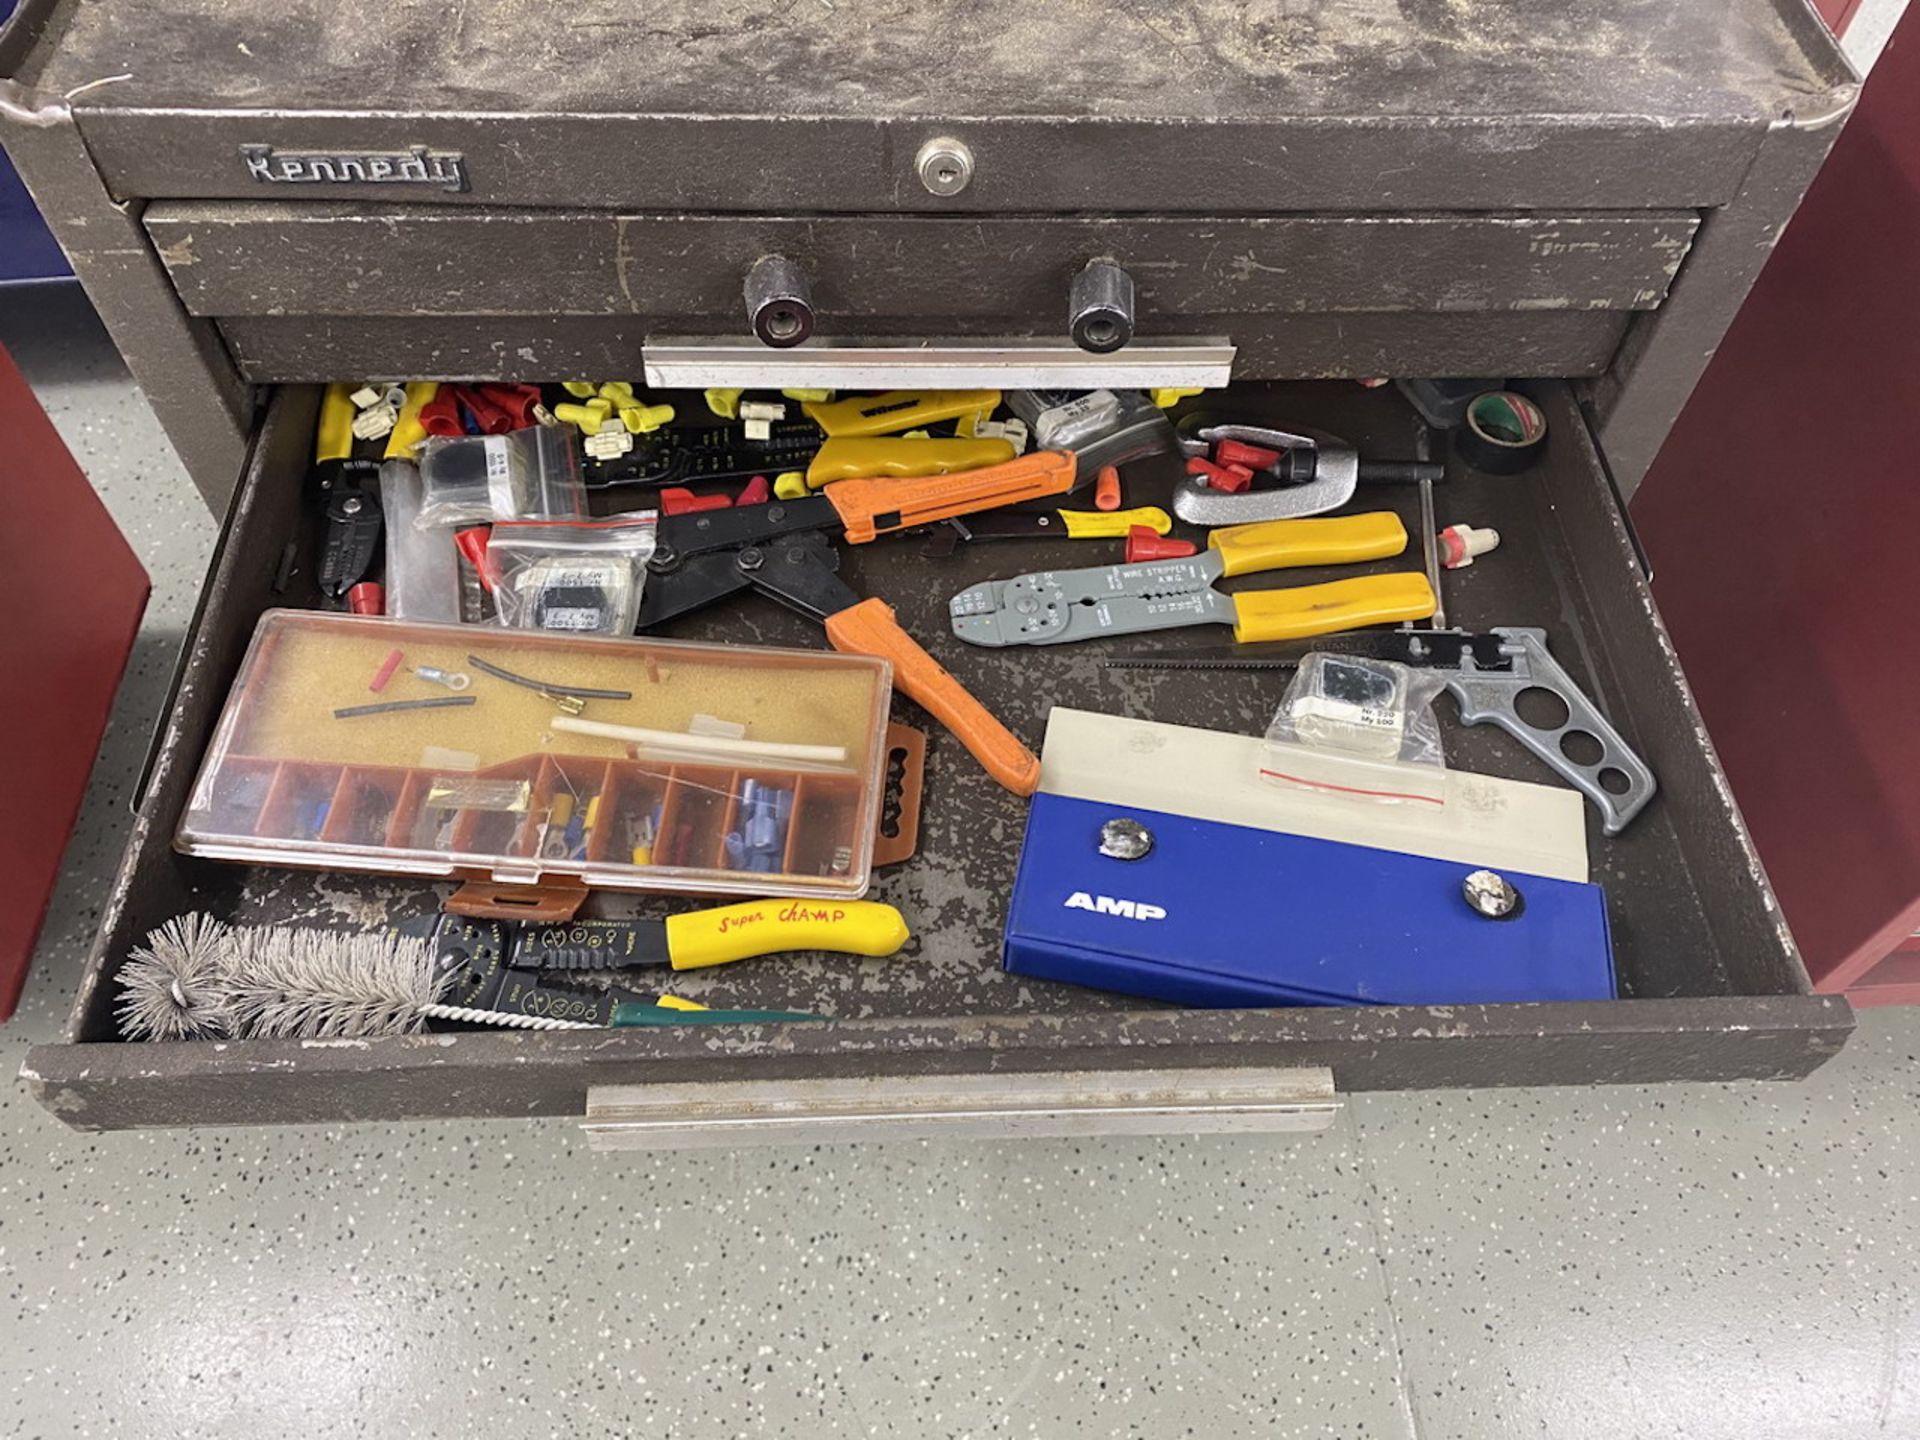 Kennedy 27" x 18" Tool Box Including Assorted Hand Tools, Wrenches, Screwdrivers and Hex Keys - Image 6 of 11